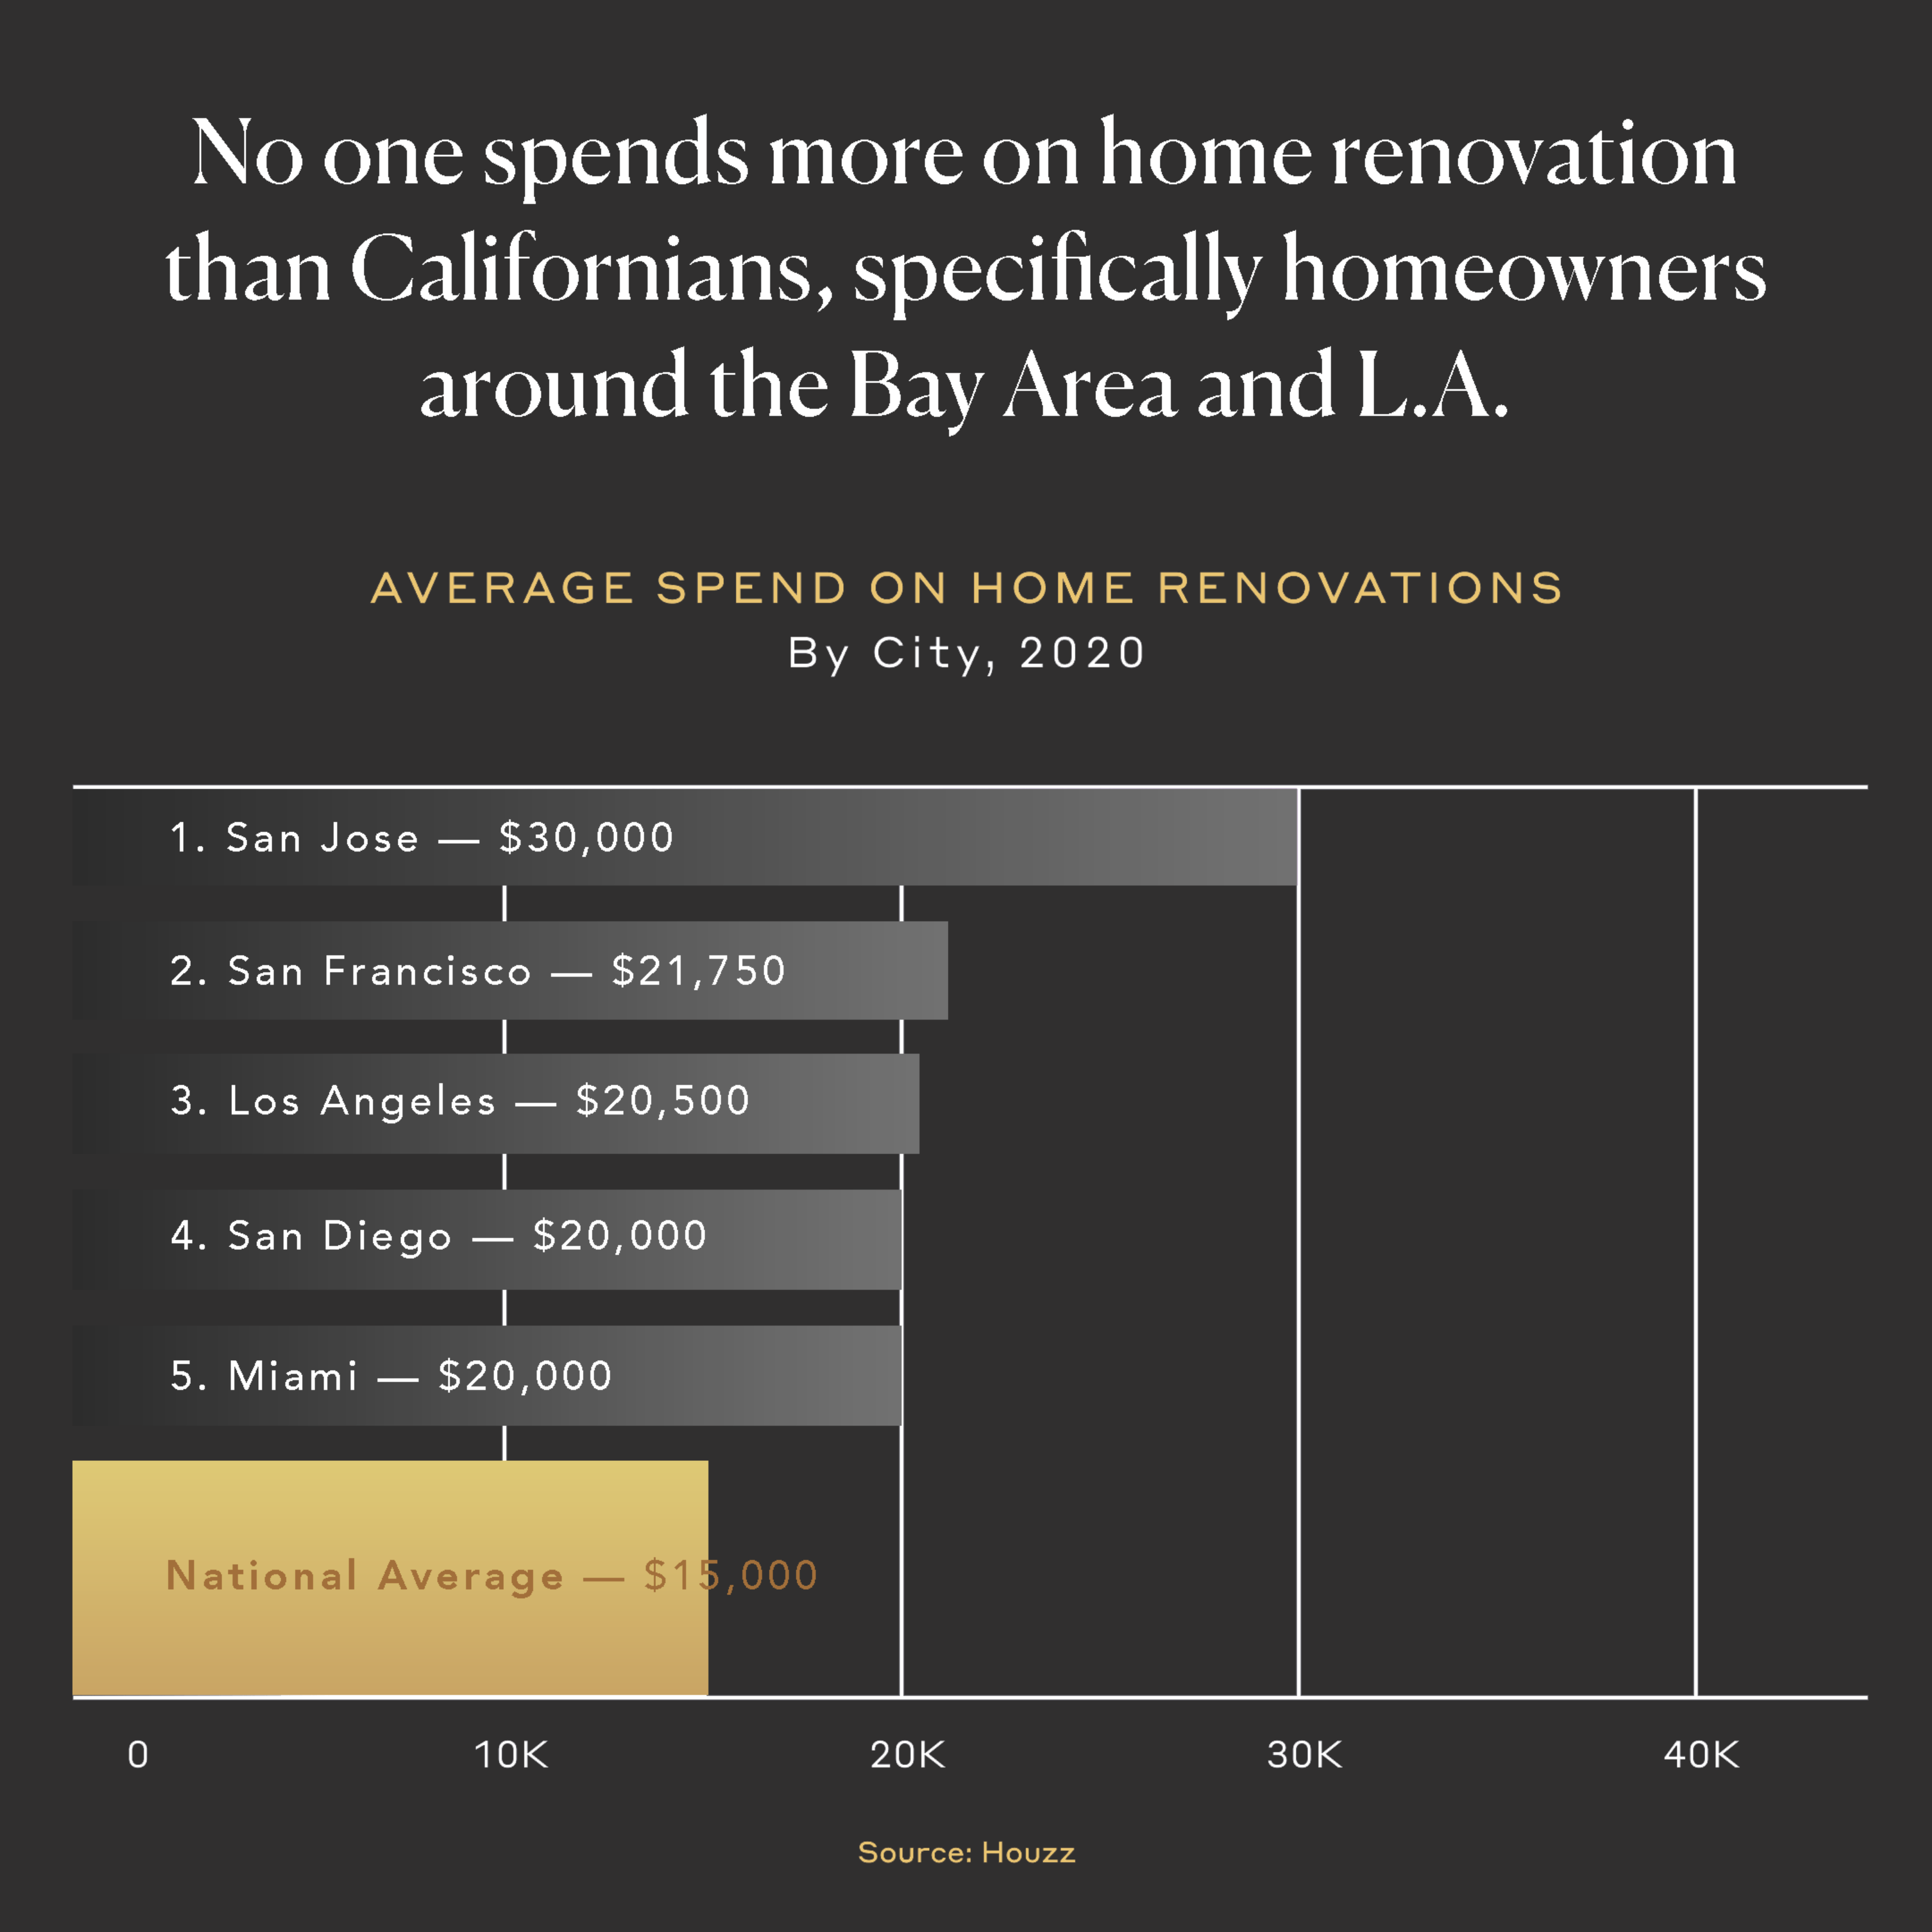 No one spends more on home renovation than Californians, specifically homeowners around the Bay Area and L.A.